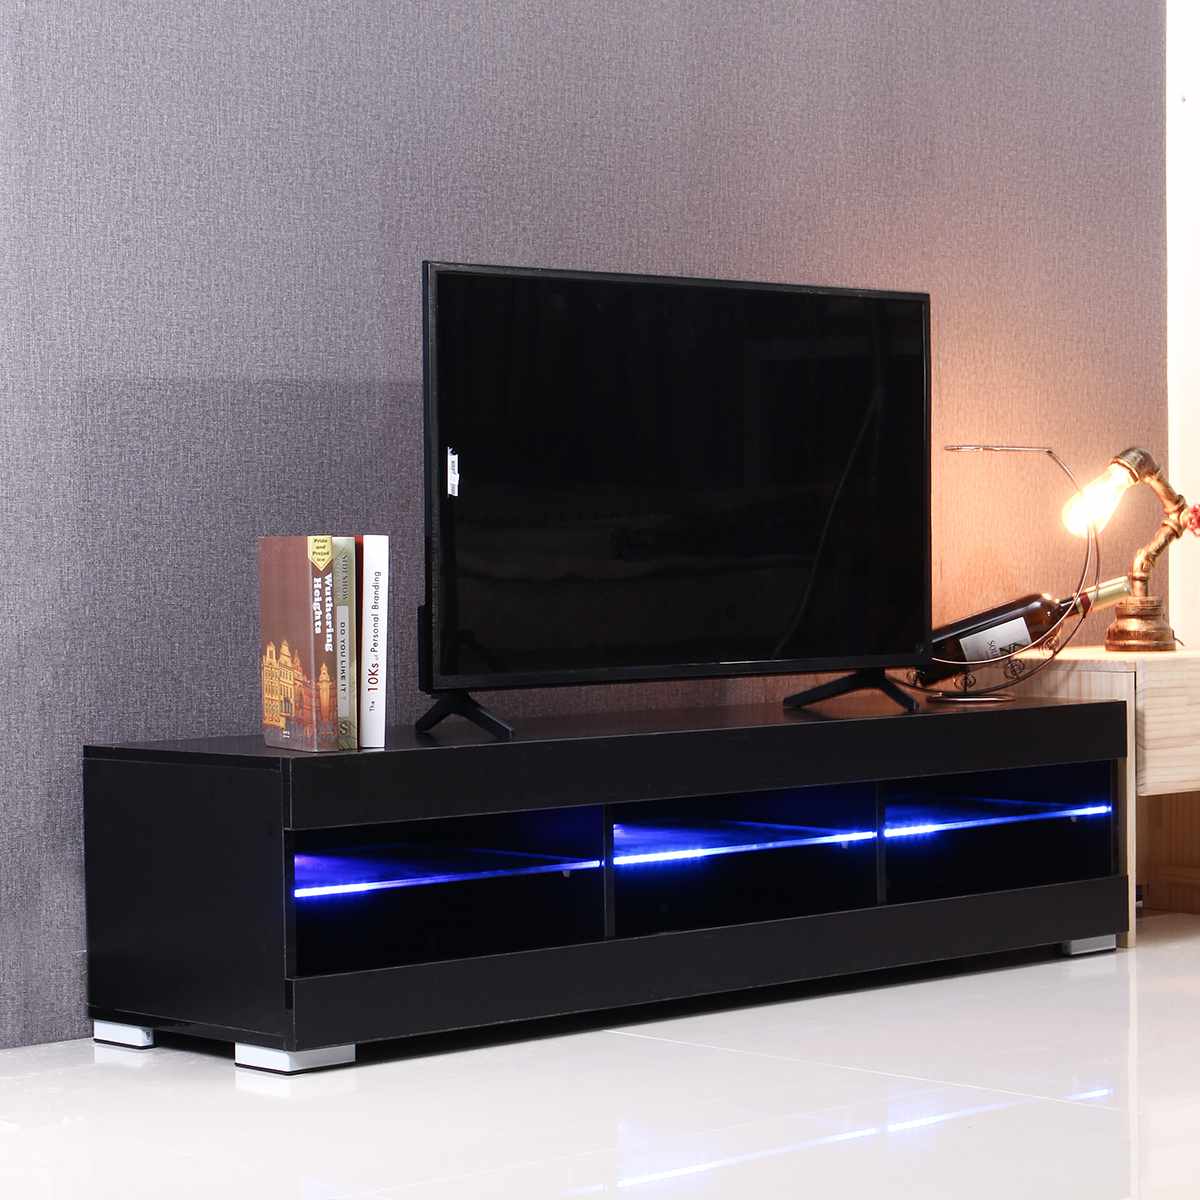 57 inch RGB LED TV Unit Cabinet Stands with 6 Open Drawers TV Bracket Table Home Living Room Furniture tv Stands high gloss | Decor Gifts and More